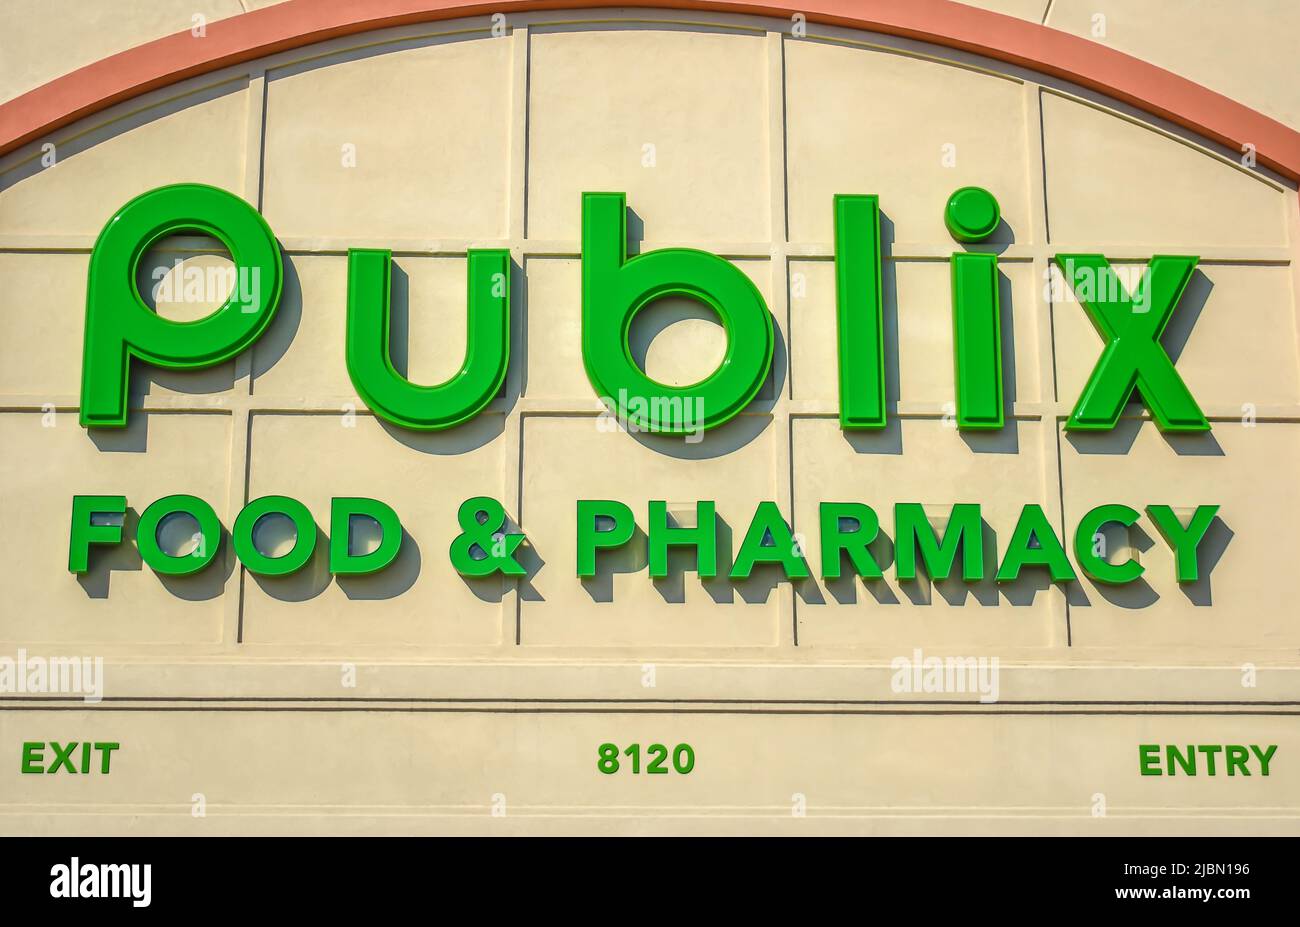 Publix Food & Pharmacy grocery market's exterior facade brand and logo signage in neon green letters on beige in sunset light on a sunny day. Stock Photo